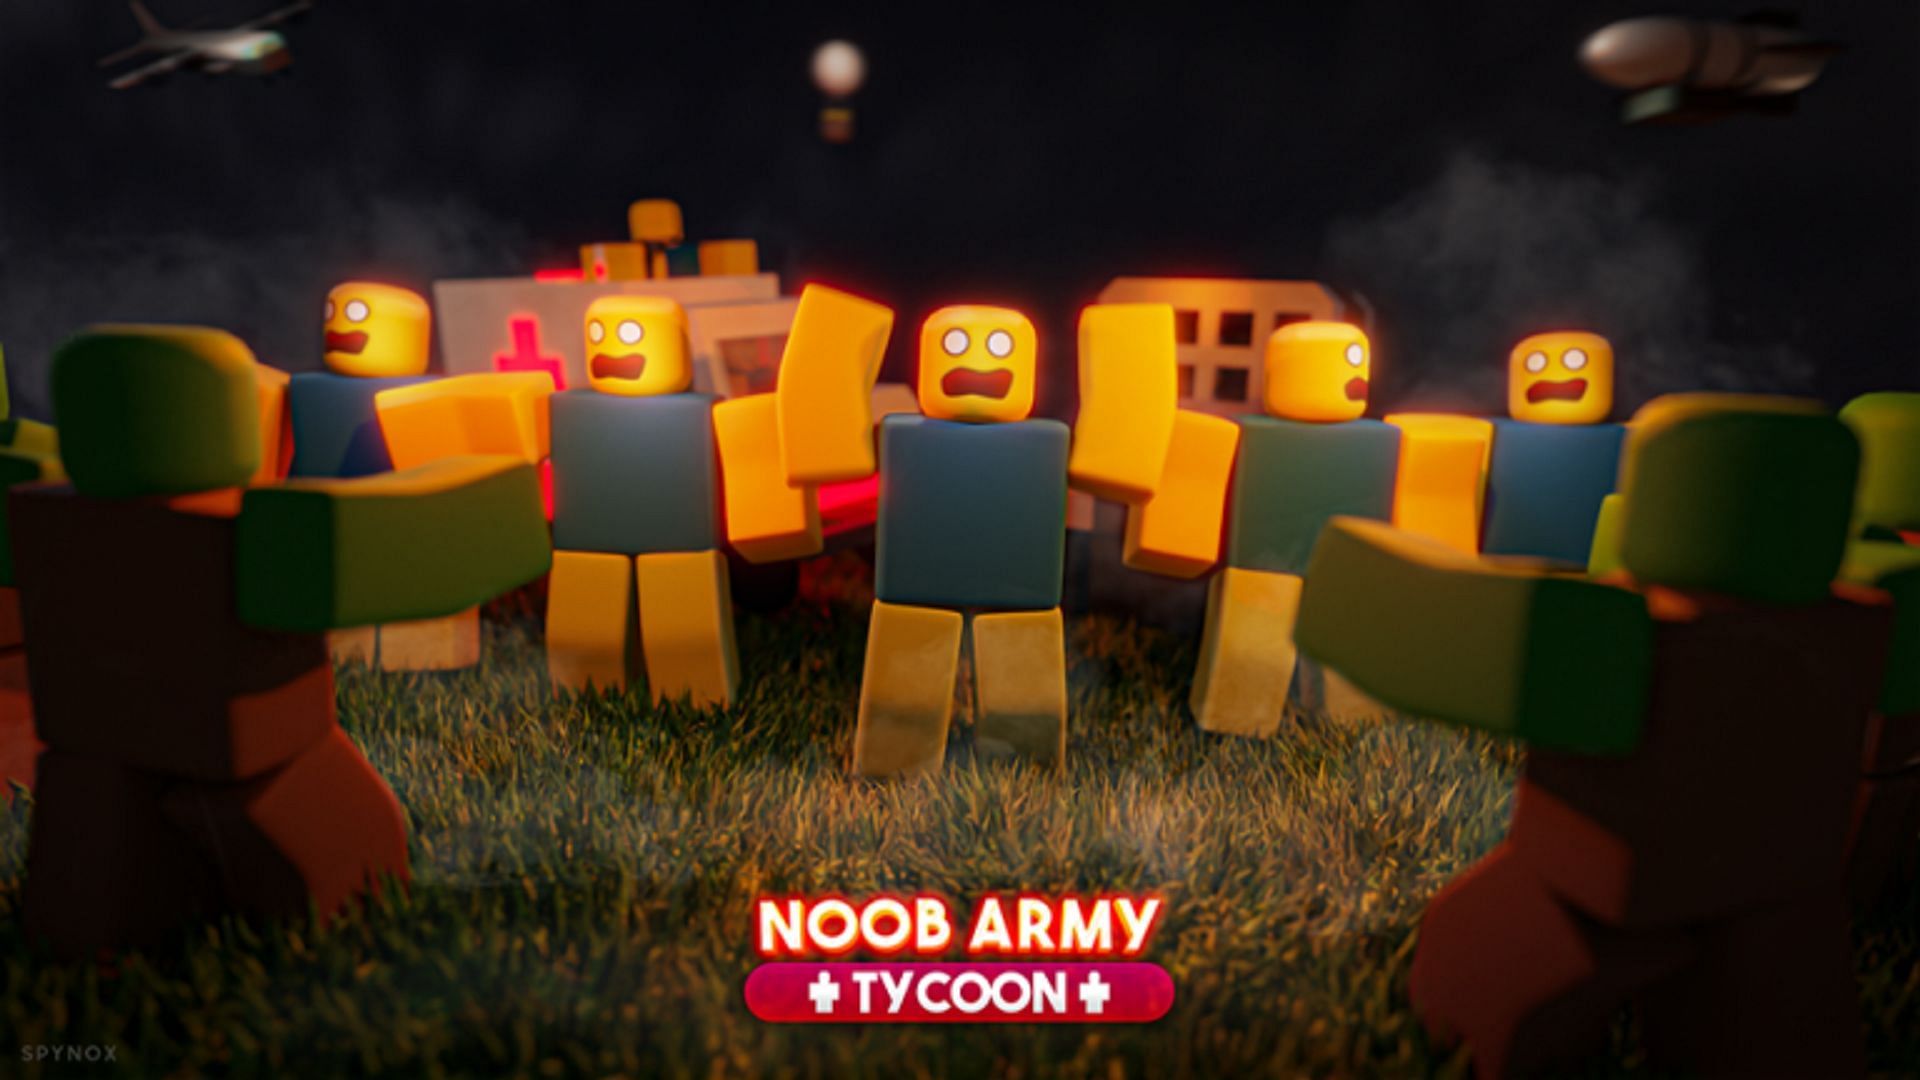 Up-to-date codes for Noob Army Tycoon (Image via Roblox)